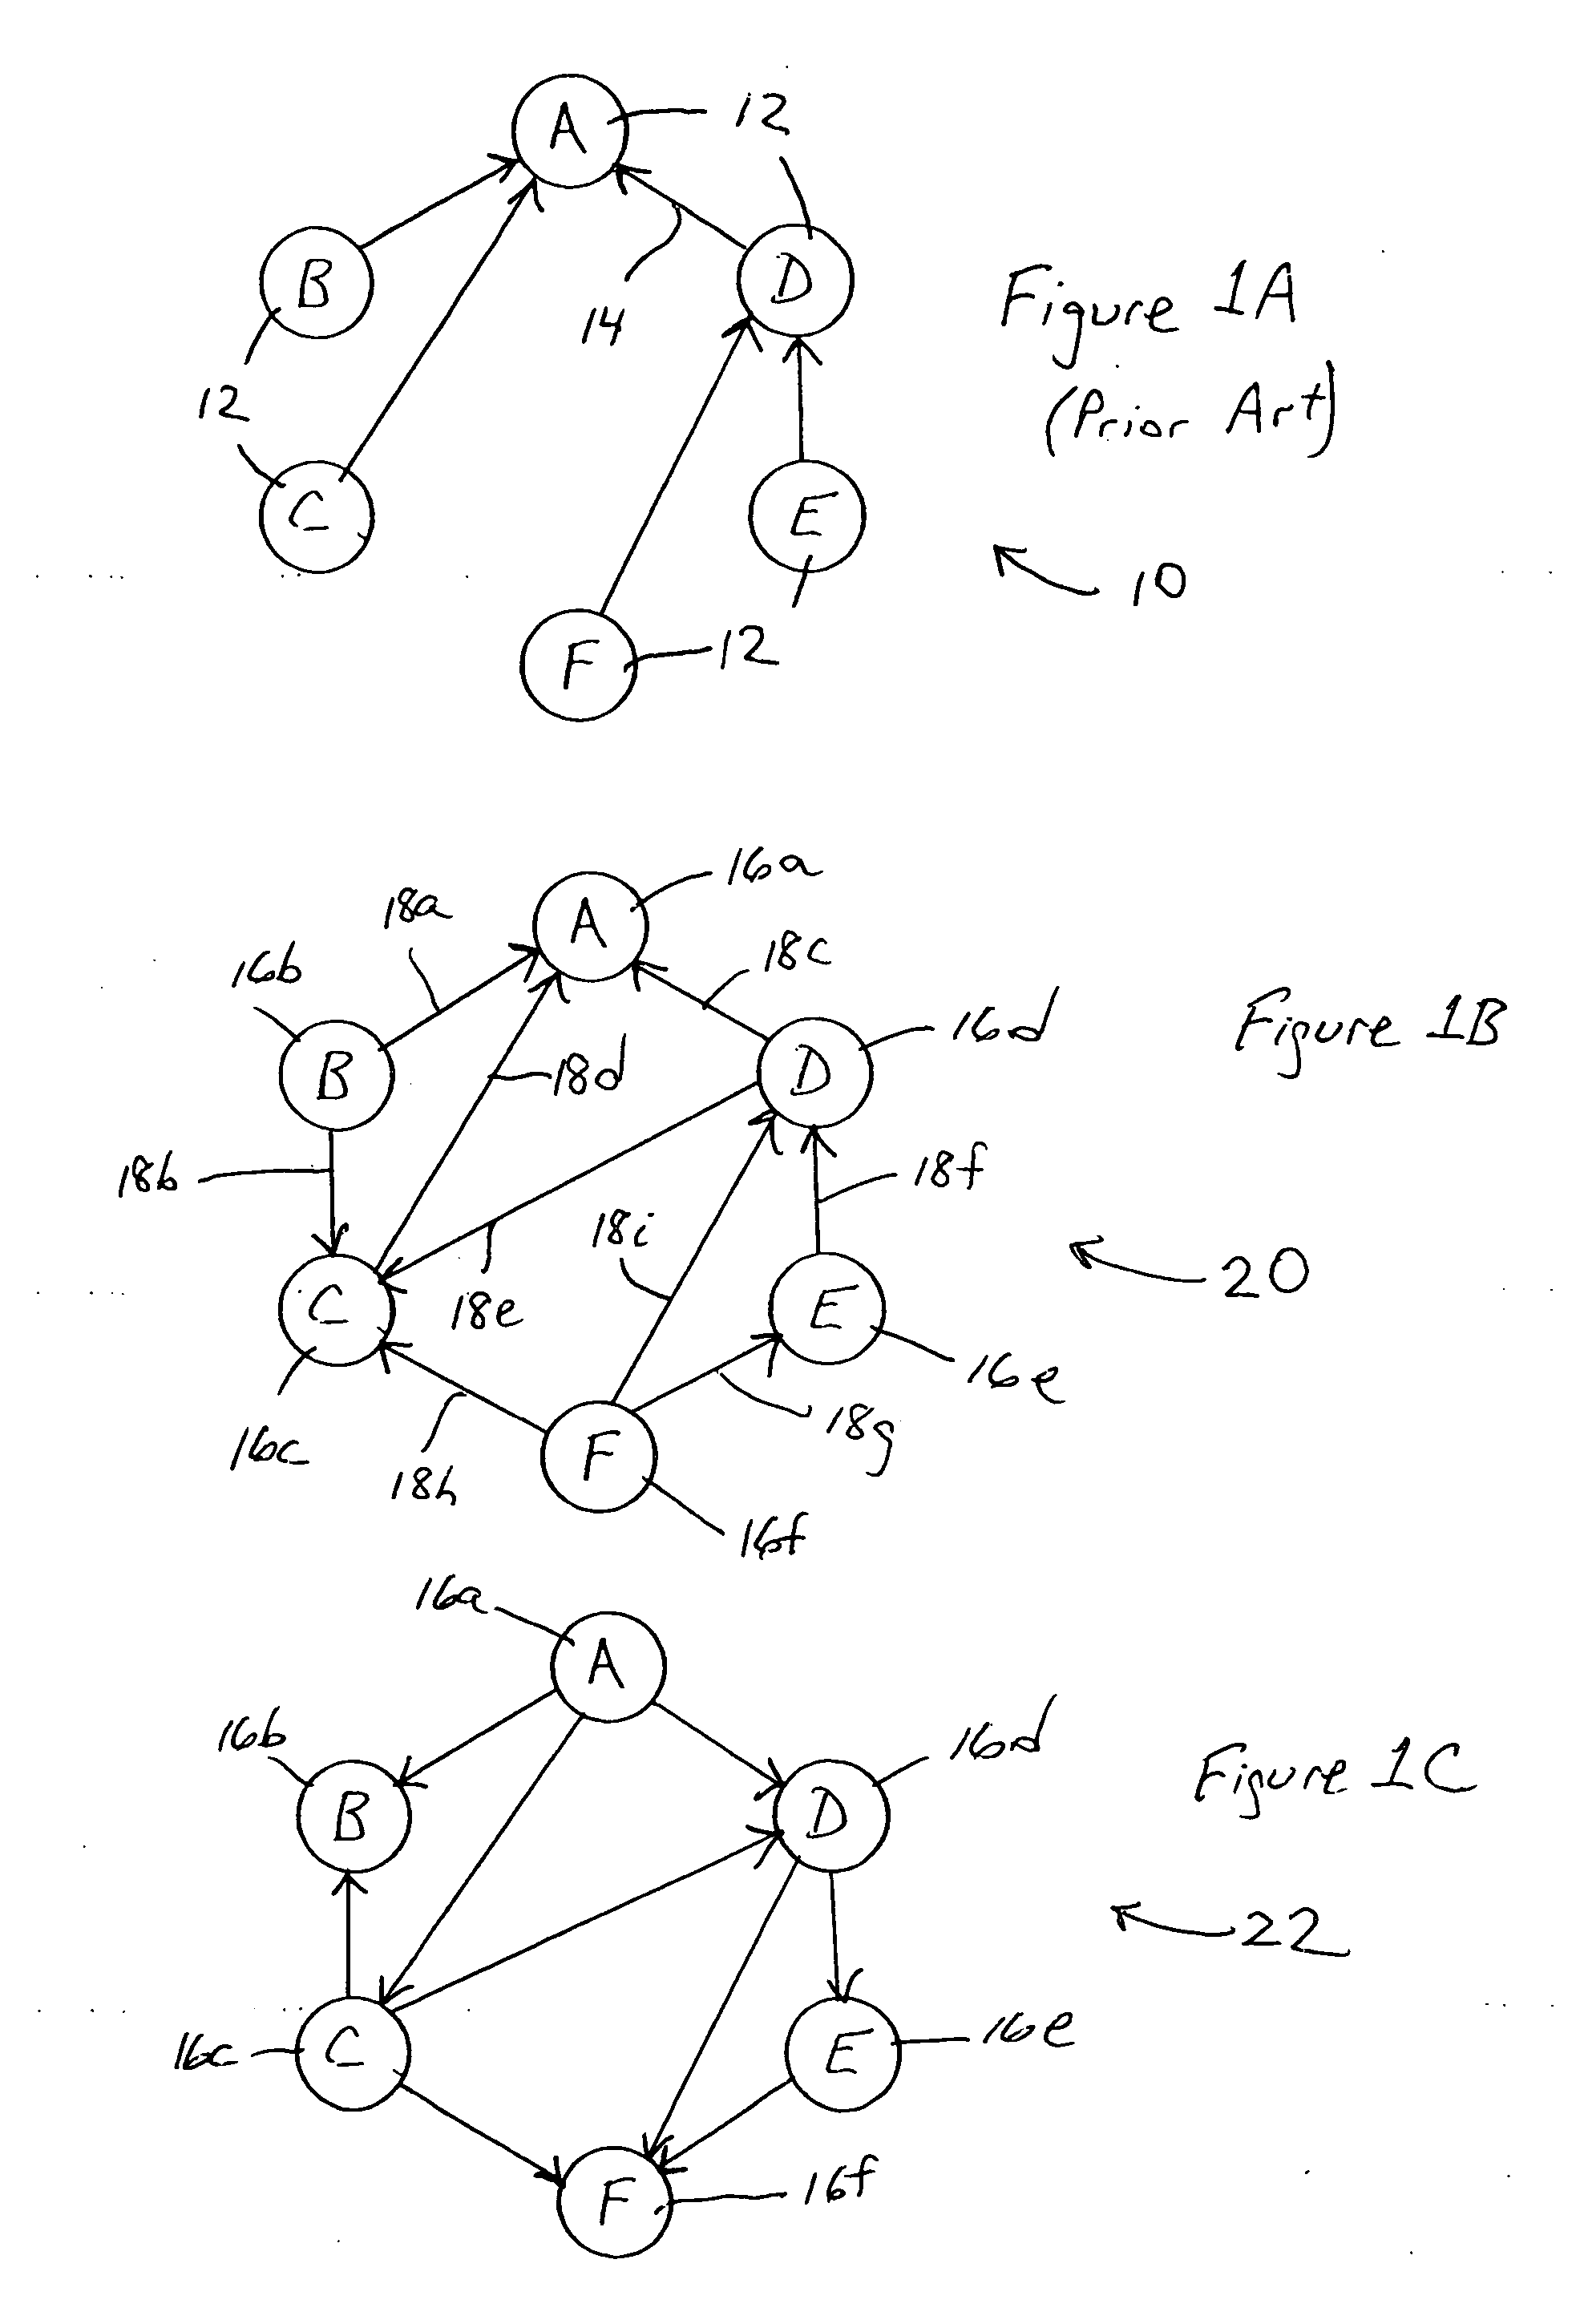 Directed acyclic graph discovery and network prefix information distribution relative to a clusterhead in an ad hoc mobile network